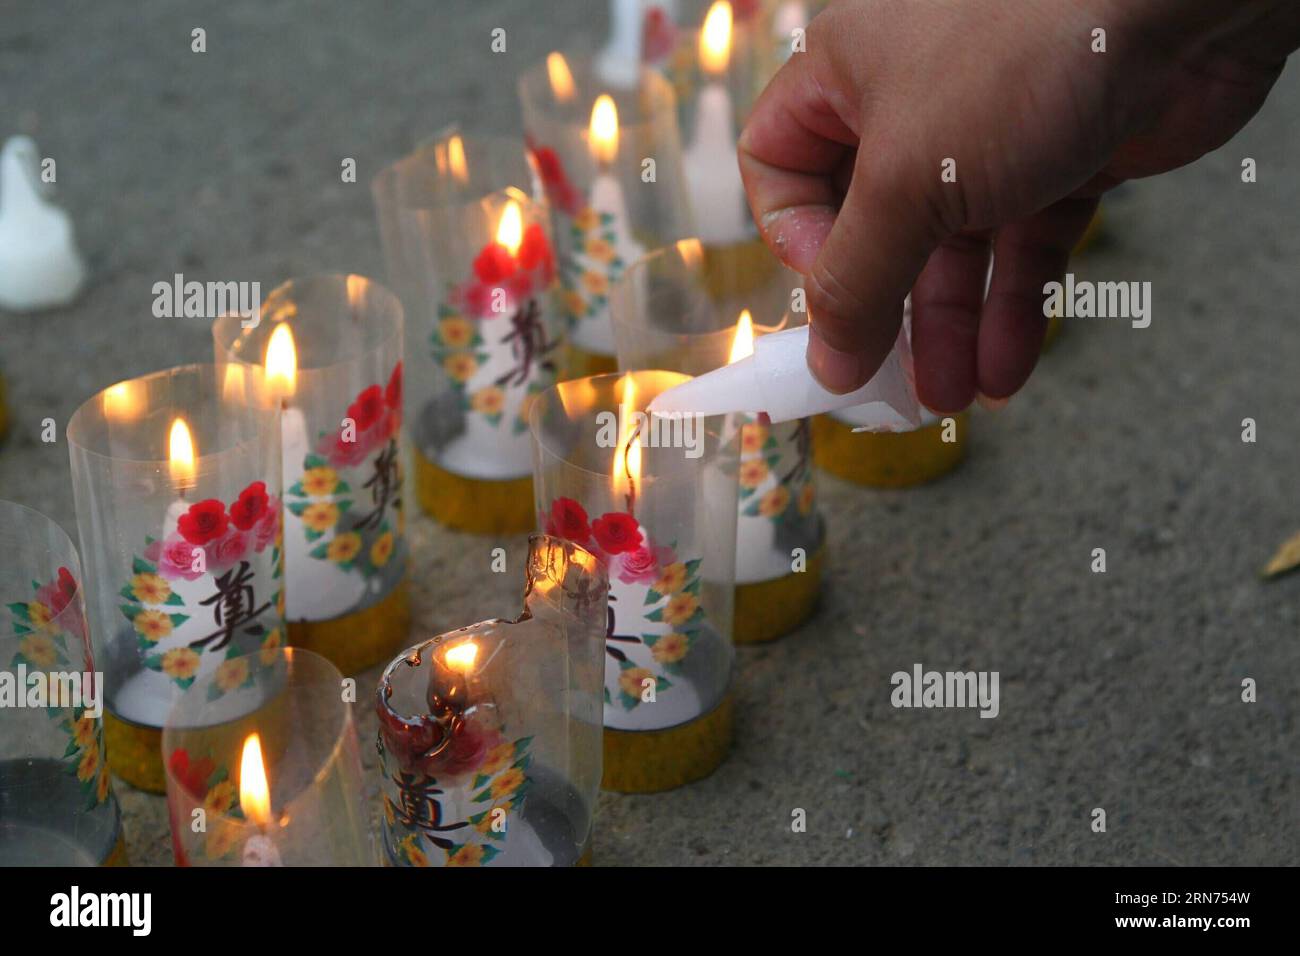 (150818) -- TIANJIN, Aug. 18, 2015 -- A mourning ceremony is held for the victims of the massive warehouse explosions at Taida Hospital near the explosion site in Tianjin, north China, Aug. 18, 2015. The death toll from last week s massive blasts in Tianjin rose to 114. ) (wyo) CHINA-TIANJIN-EXPLOSION-MOURNING (CN) ChenxYichen PUBLICATIONxNOTxINxCHN   Tianjin Aug 18 2015 a Mourning Ceremony IS Hero for The Victims of The Massive Warehouse Explosions AT  Hospital Near The Explosion Site in Tianjin North China Aug 18 2015 The Death toll from Load Week S Massive BLAST in Tianjin Rose to 114 wyo C Stock Photo